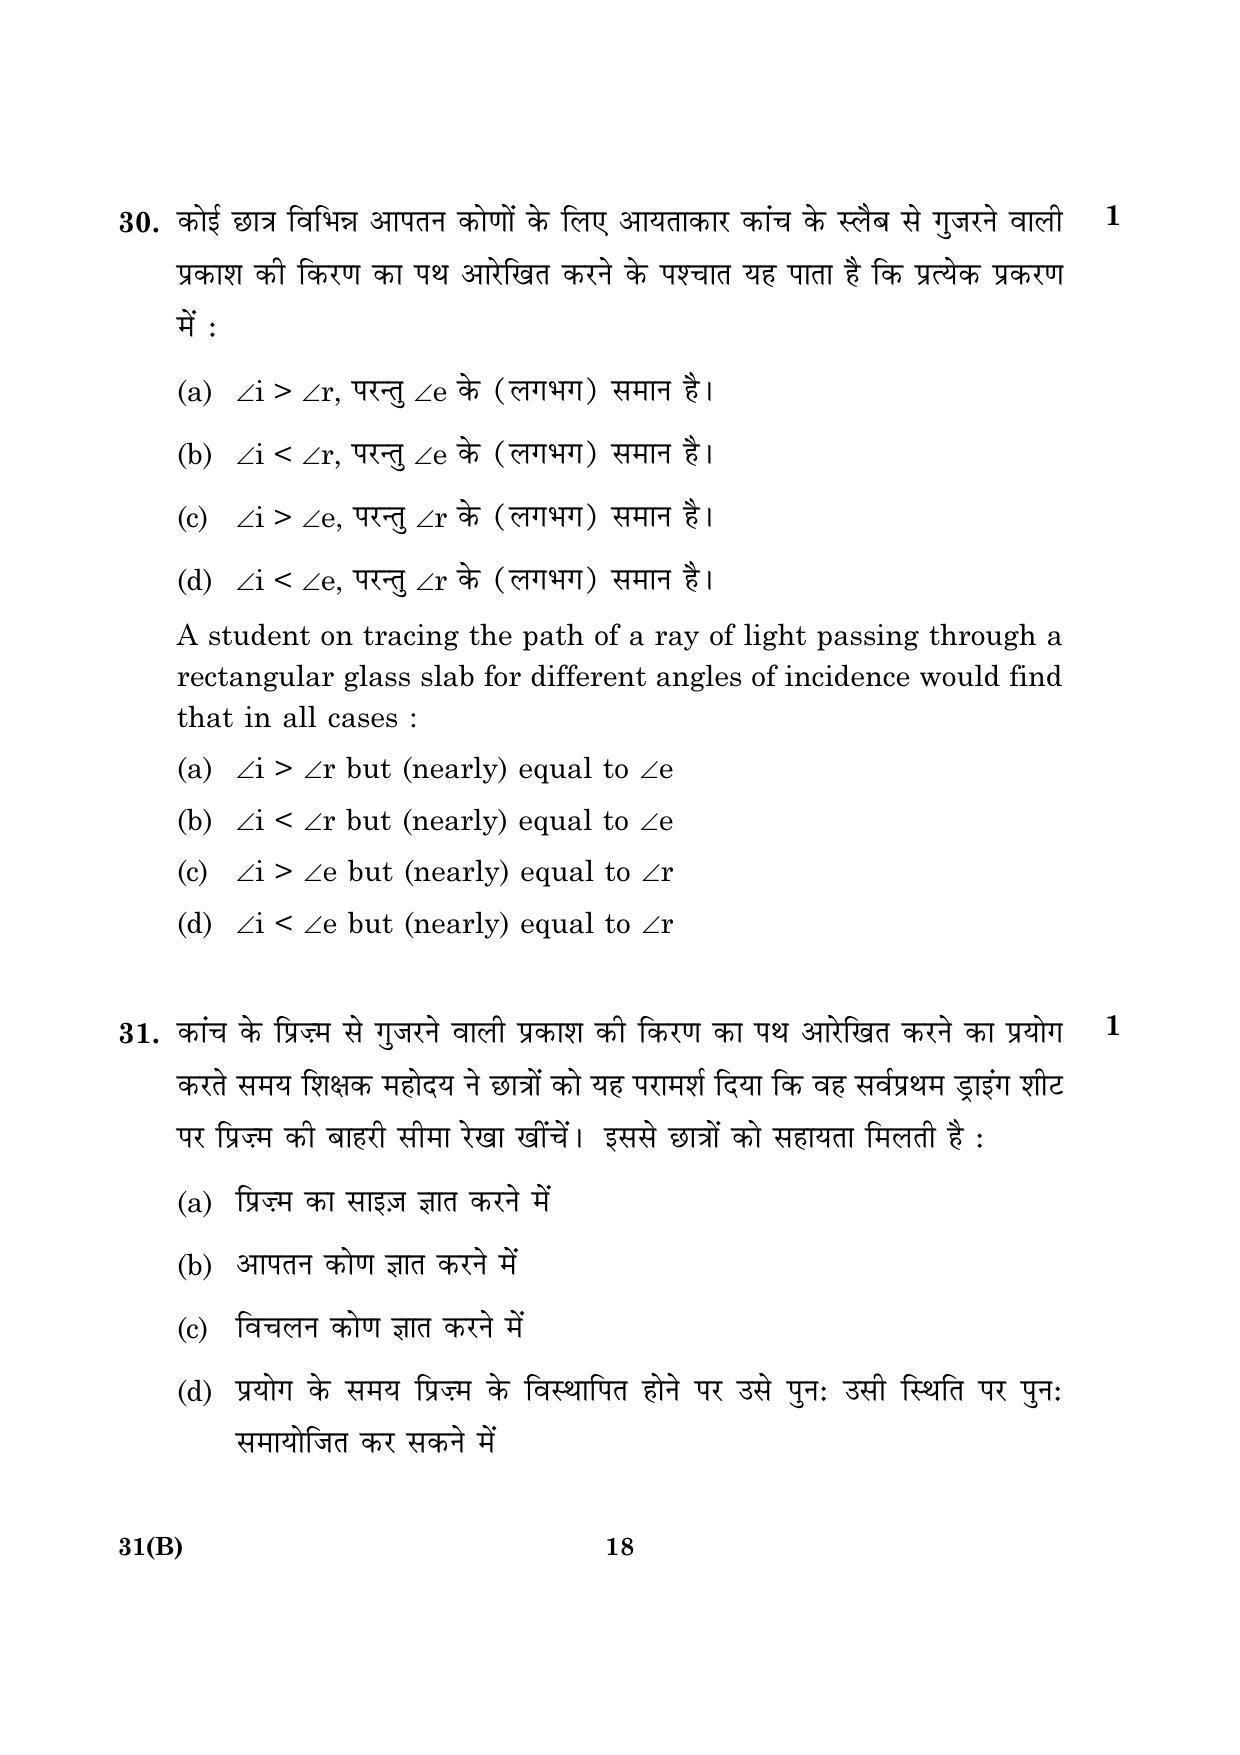 CBSE Class 10 031(B) Science 2016 Question Paper - Page 18